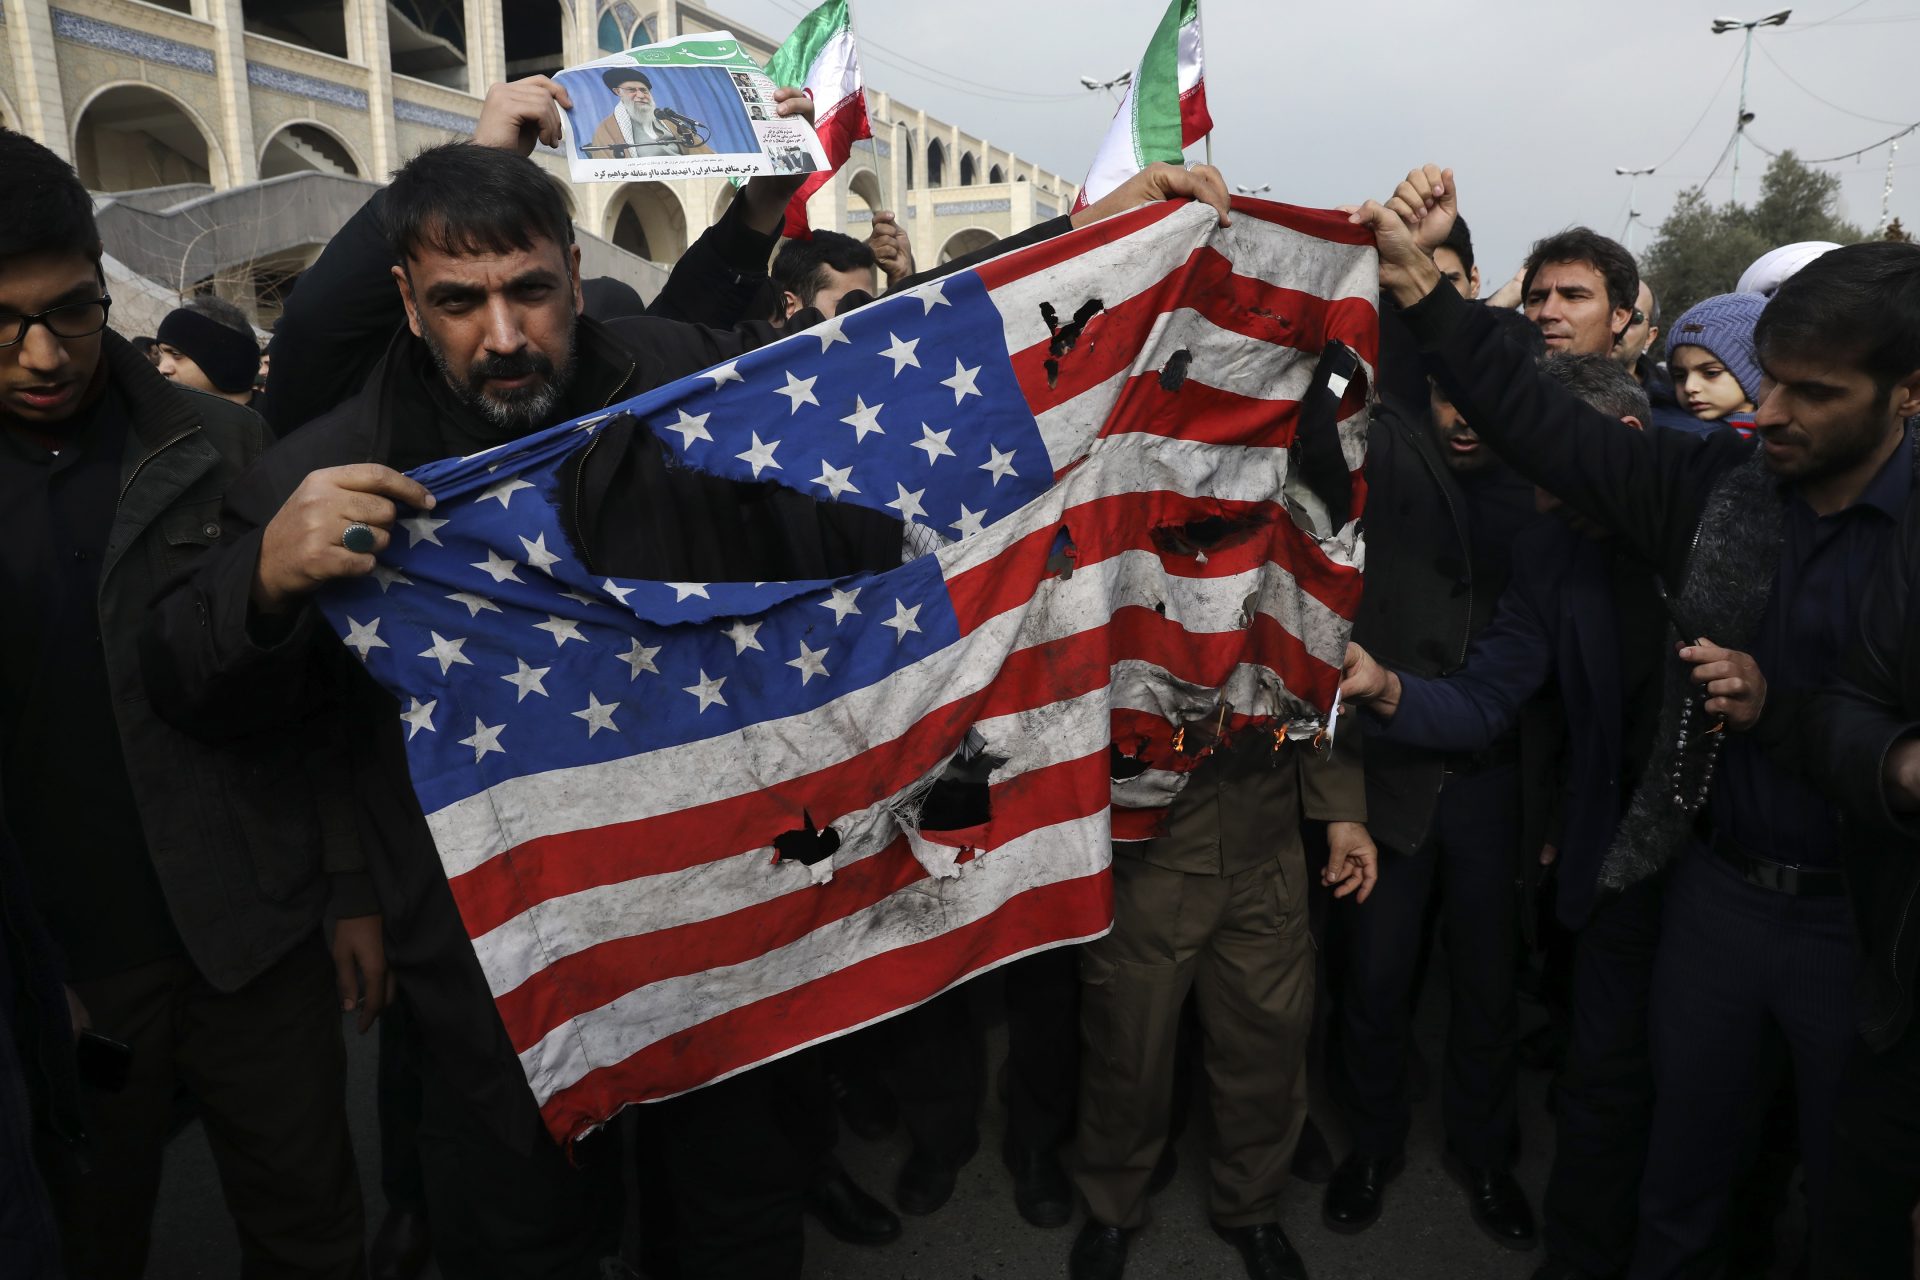 Protesters burn a U.S. flag during a demonstration over the U.S. airstrike in Iraq that killed Iranian Revolutionary Guard Gen. Qassem Soleimani, in Tehran, Iran, Jan. 3, 2020. Iran has vowed "harsh retaliation" for the U.S. airstrike near Baghdad's airport that killed Tehran's top general and the architect of its interventions across the Middle East, as tensions soared in the wake of the targeted killing.